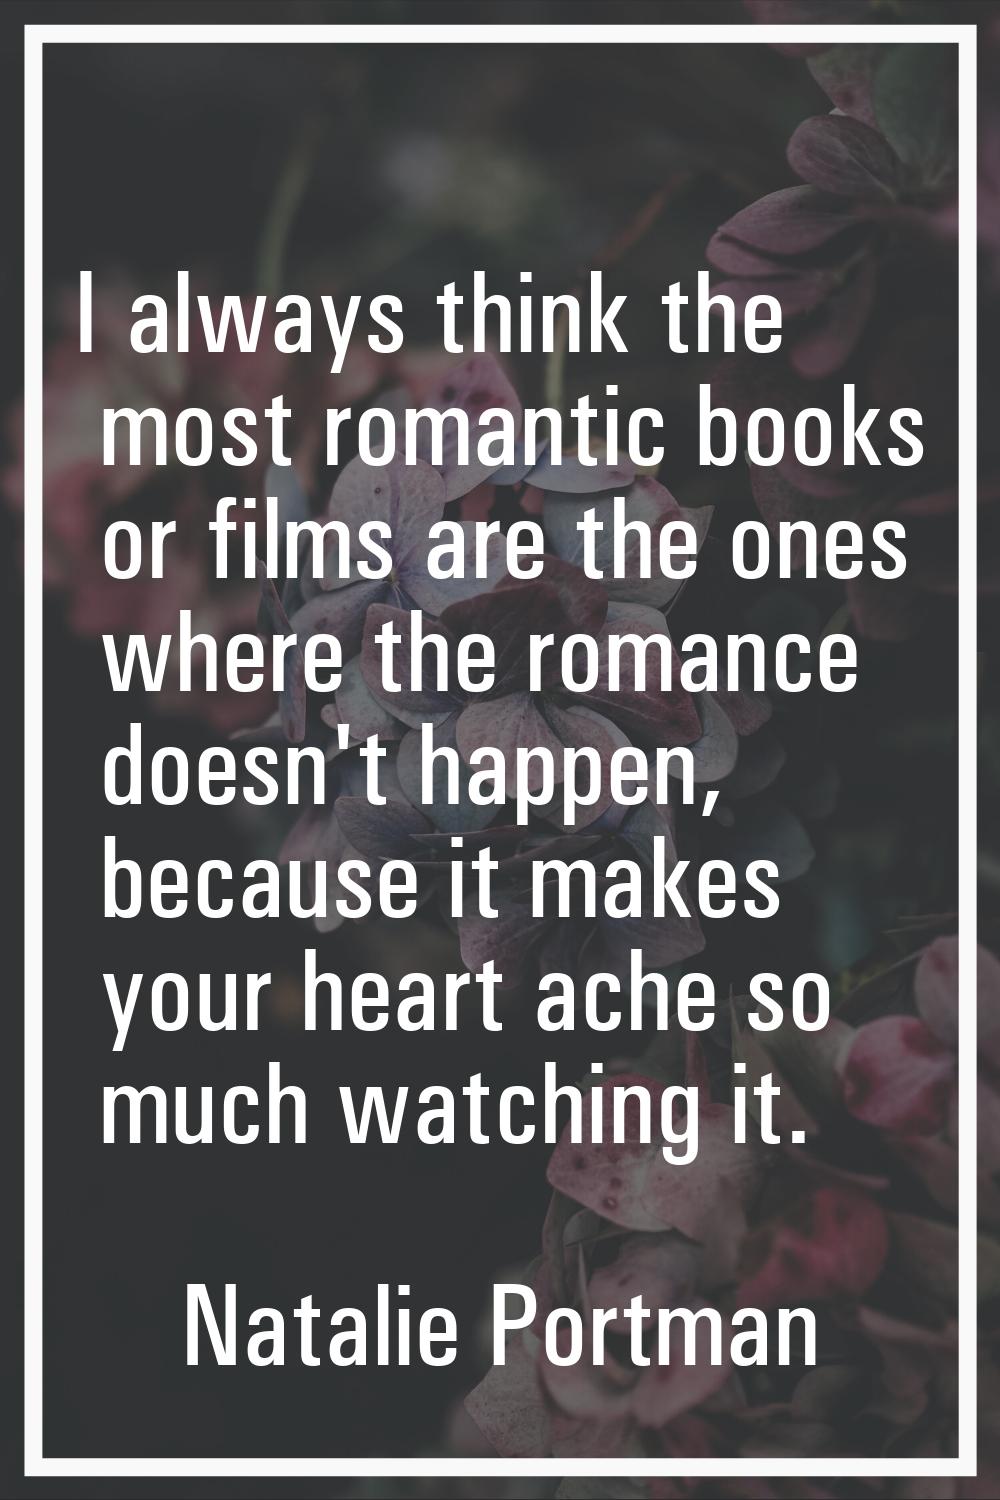 I always think the most romantic books or films are the ones where the romance doesn't happen, beca